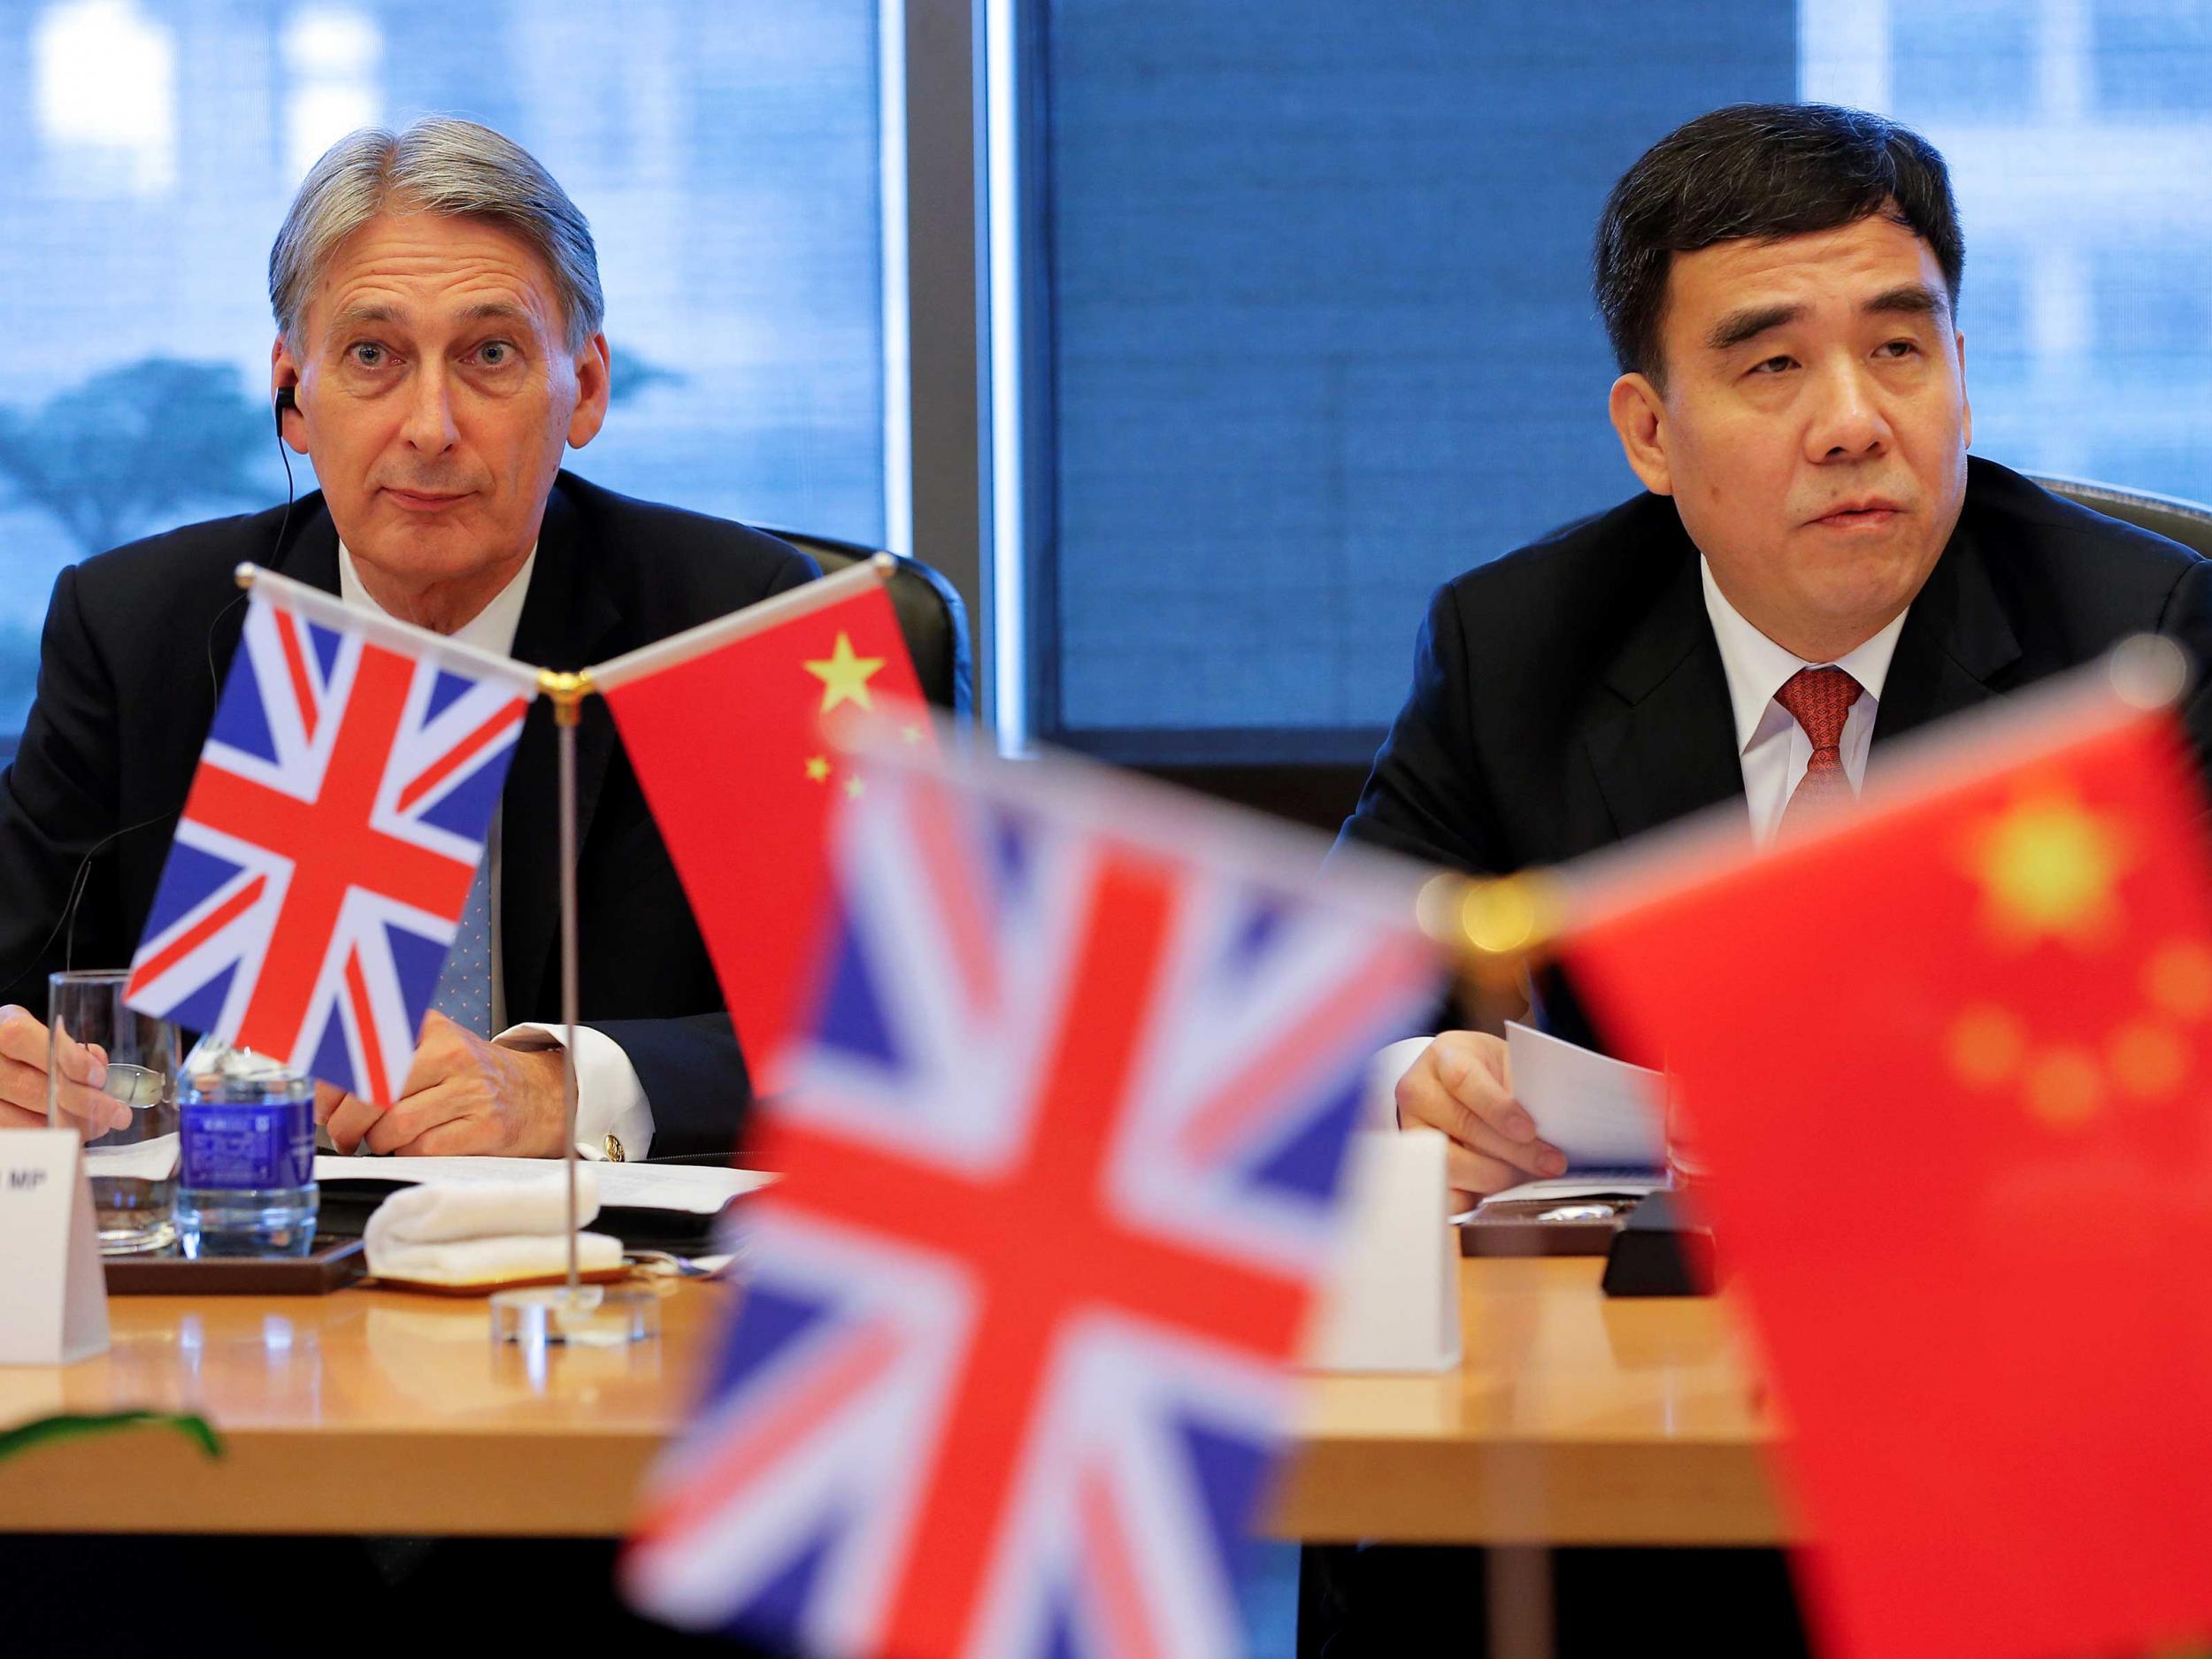 Britain's Chancellor of the Exchequer, Philip Hammond (L) and Bank of China Chairman Tian Guoli attend UK-China High Level Financial Services Roundtable at the Bank of China head office building in Beijing, China July 22, 2016